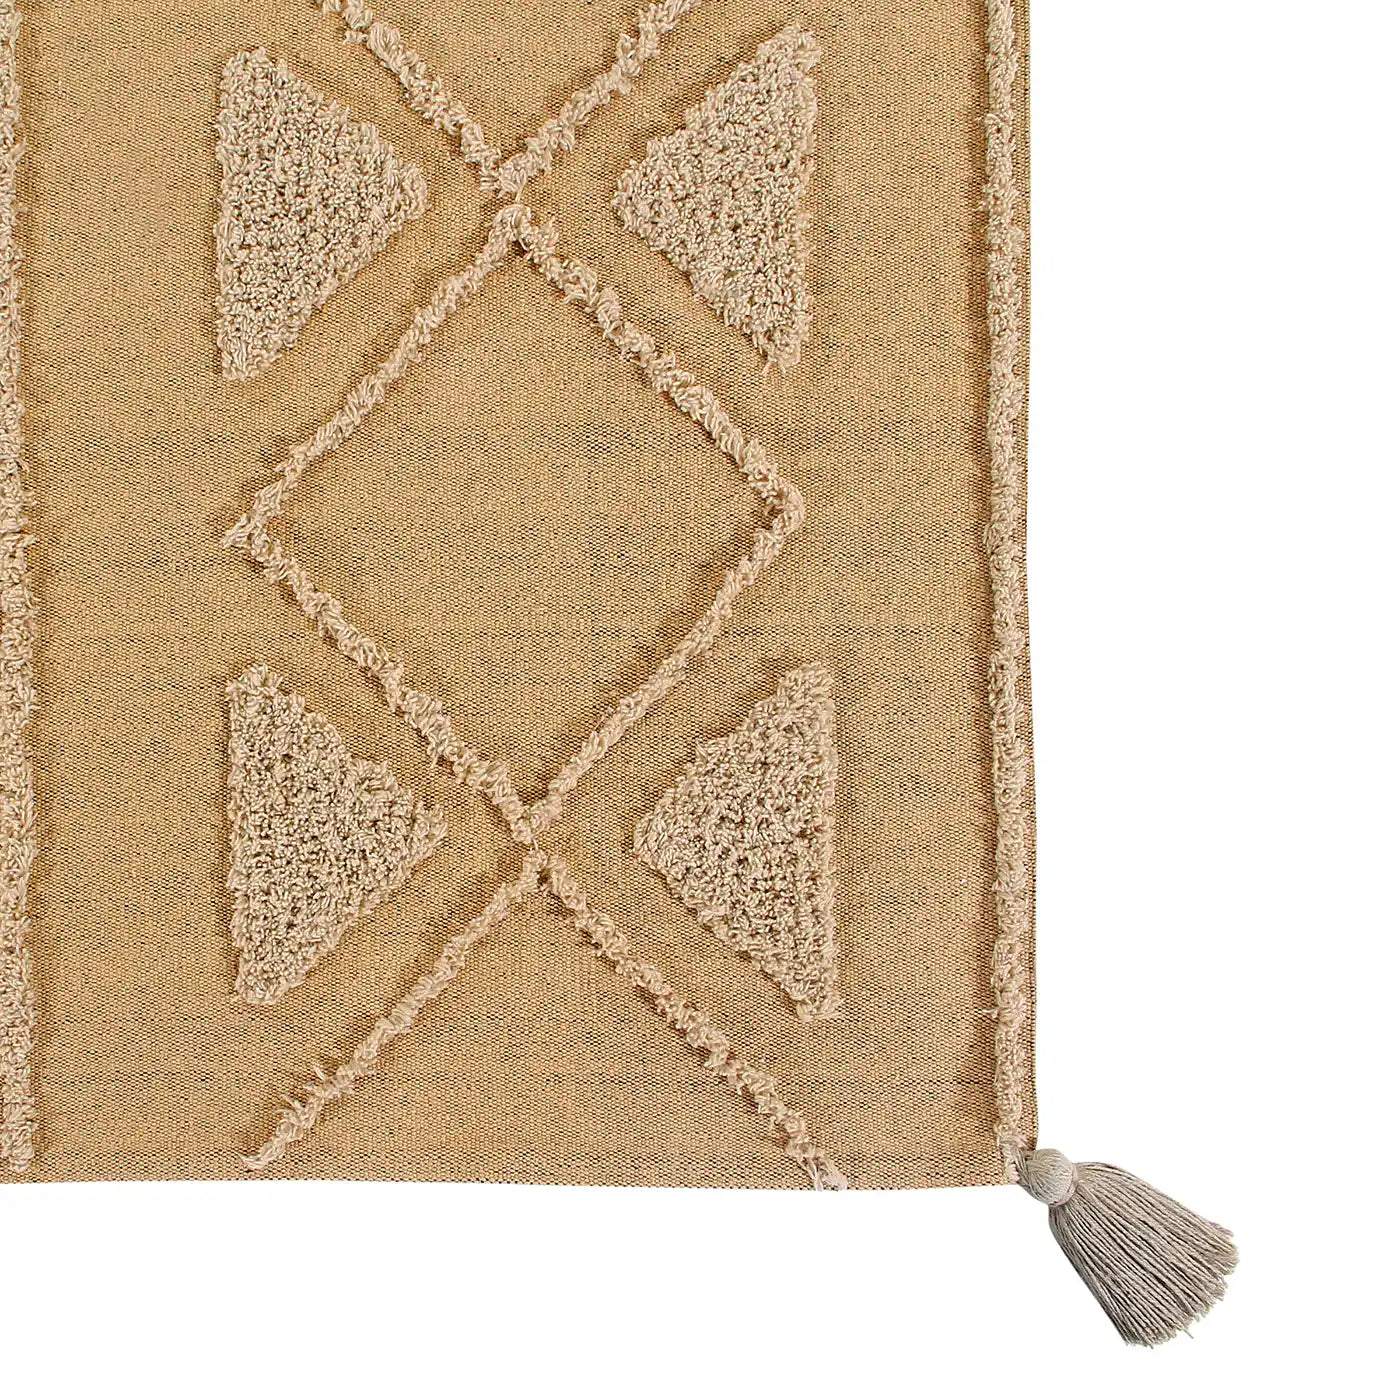 Lorena Canals Tribu Washable Rug - Honey (Re Edition + Canvas Collection)